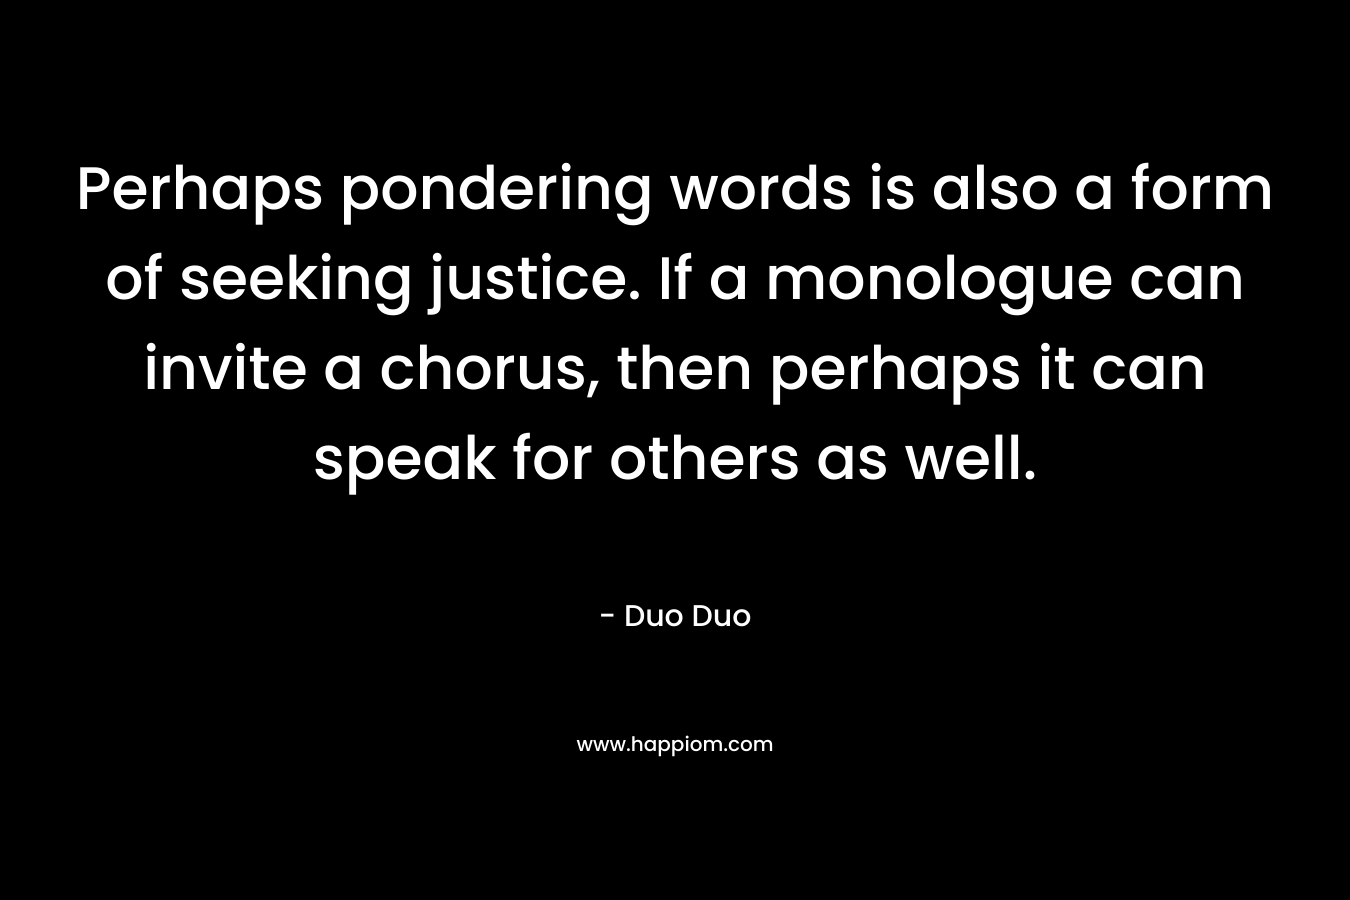 Perhaps pondering words is also a form of seeking justice. If a monologue can invite a chorus, then perhaps it can speak for others as well. – Duo Duo